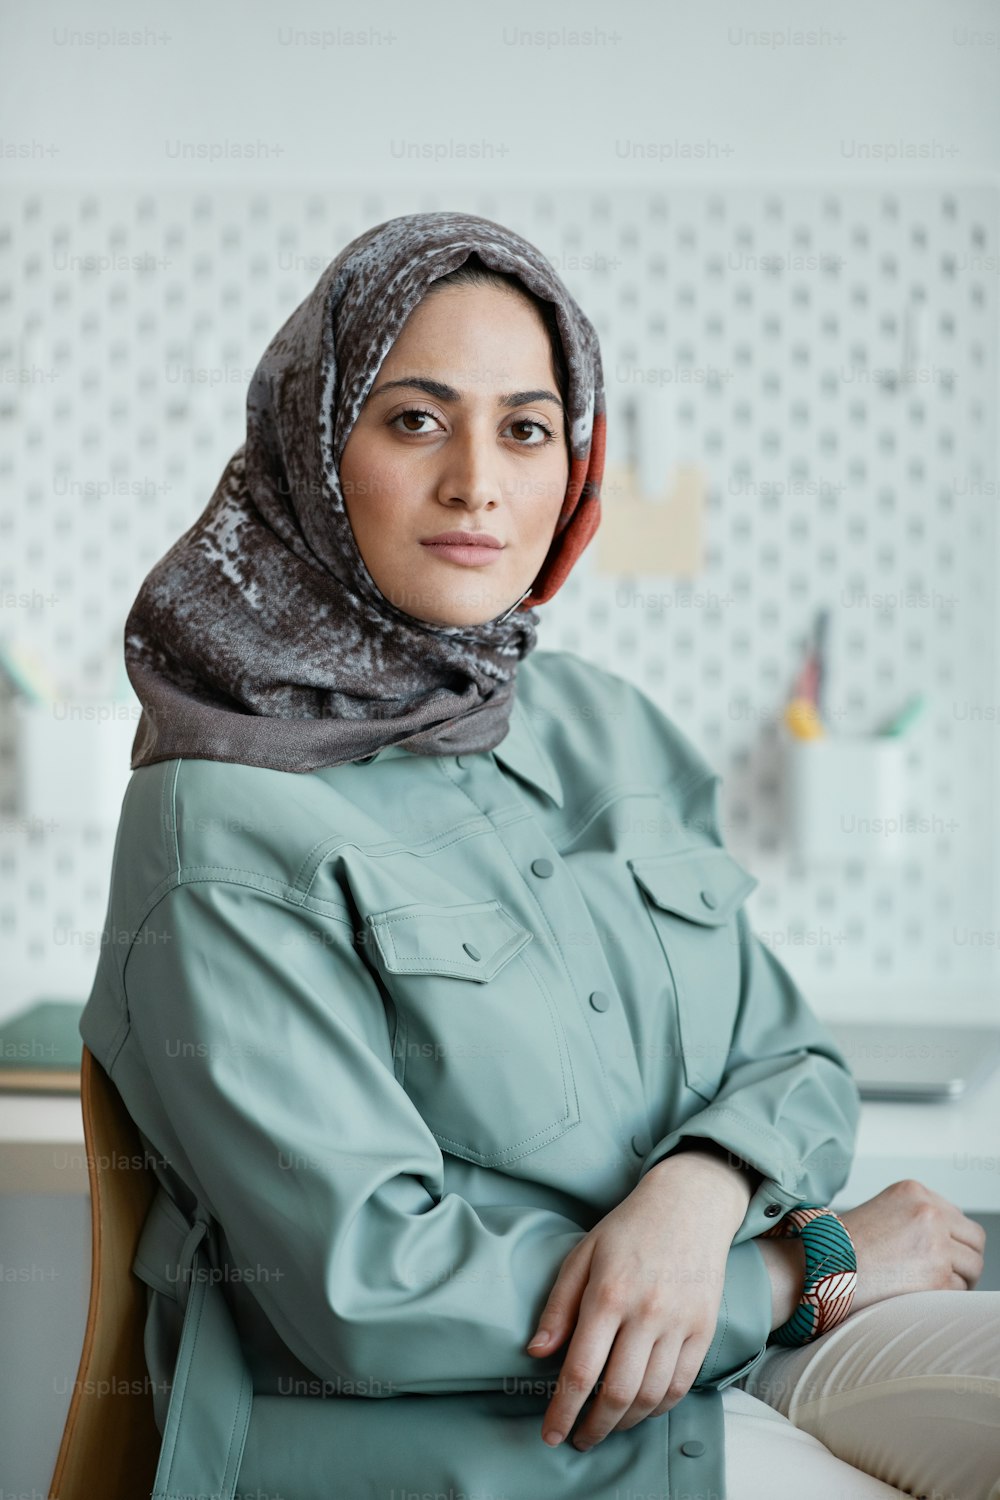 Vertical portrait of confident Middle-Eastern woman wearing headscarf in office and looking at camera